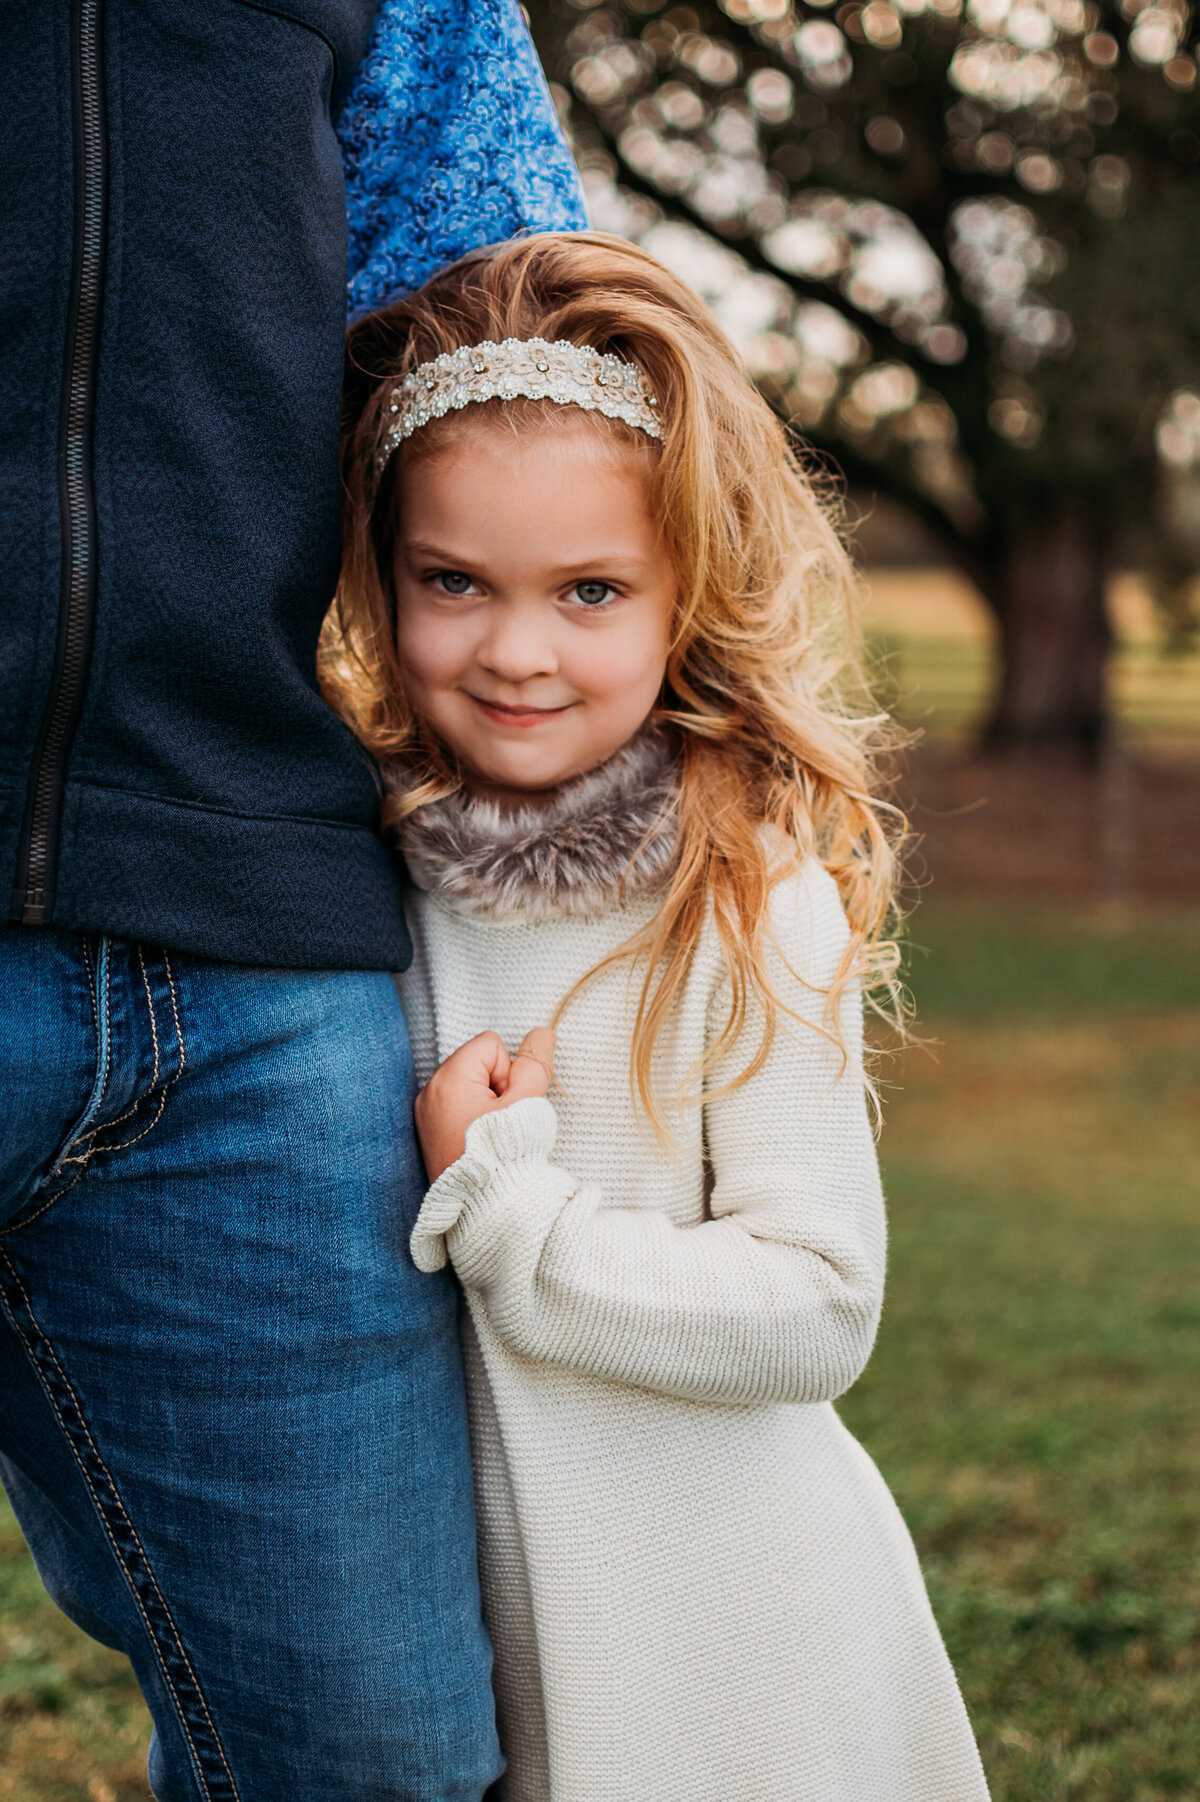 A close up picture of a young girl hugging her dad's leg as she smiles at the camera.